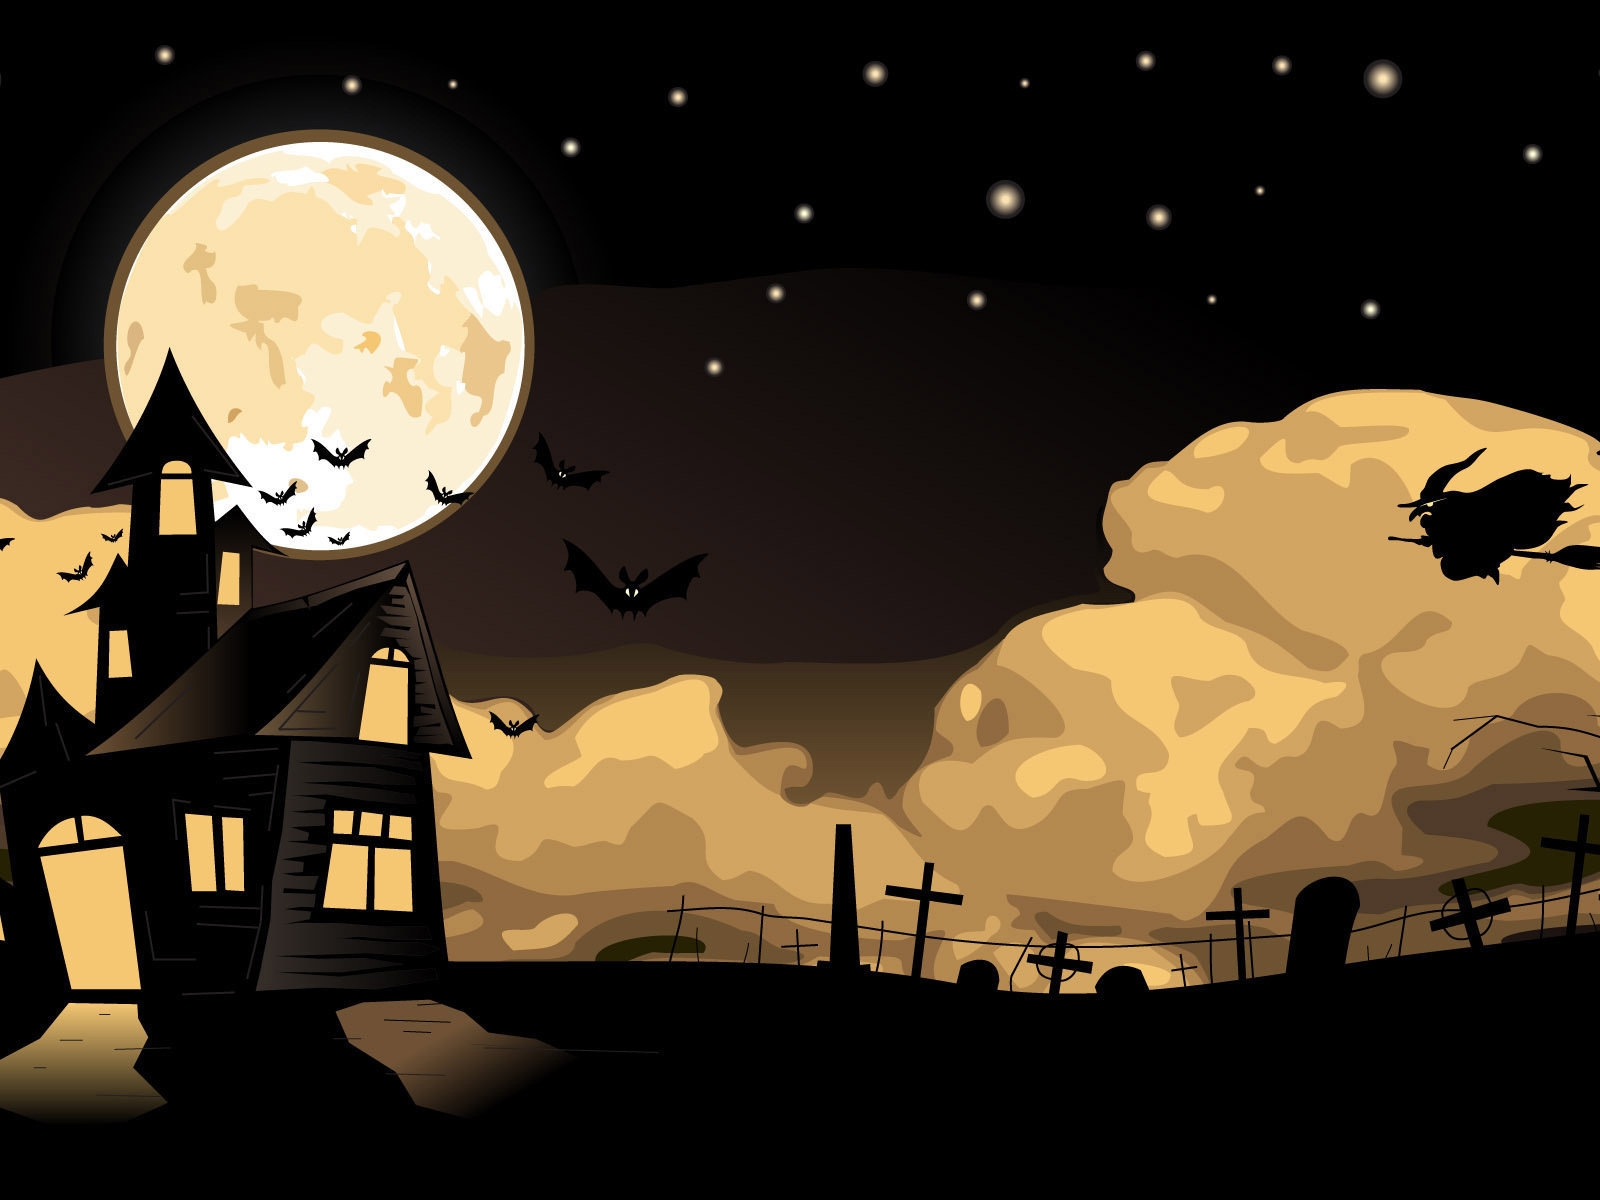 The Halloween Night for 1600 x 1200 resolution